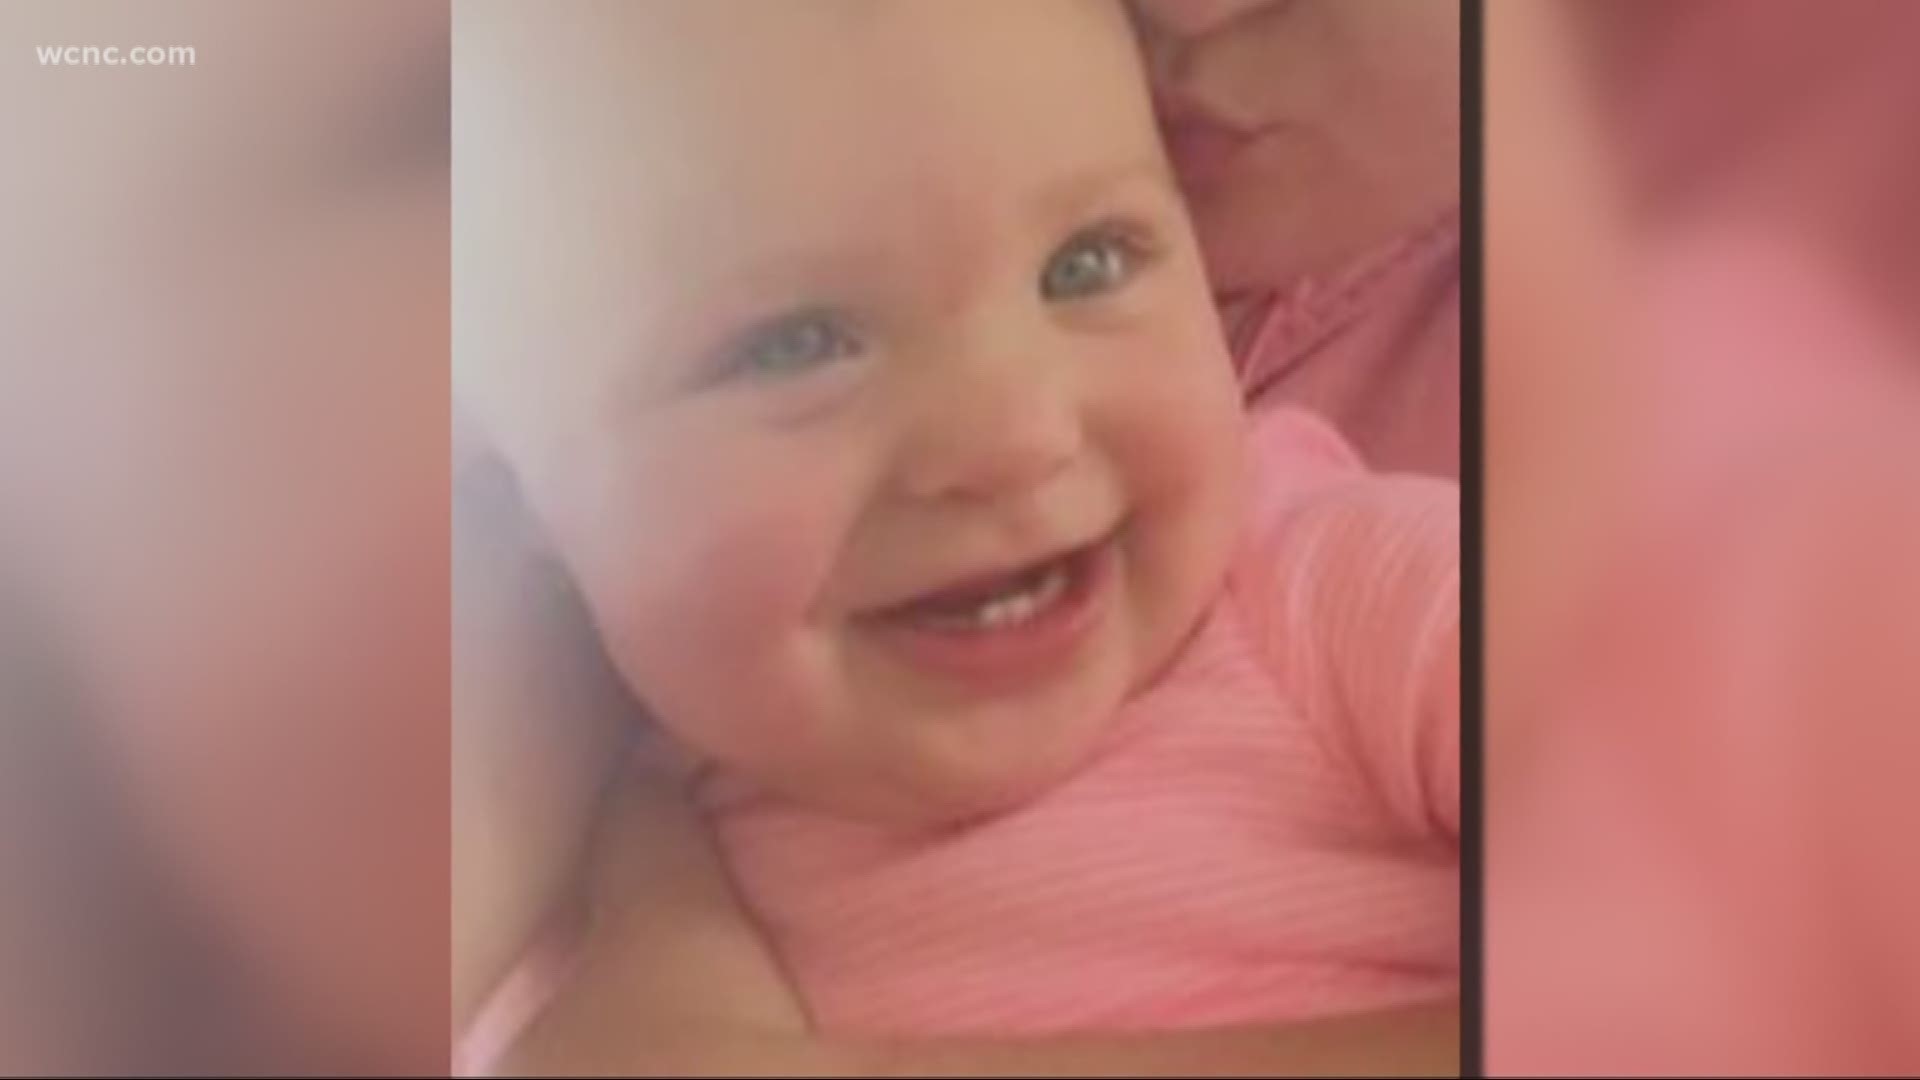 Earlier in the day, the girl's mother told deputies she was walking to her mailbox carrying her 11-month-old daughter Harlee Lewis. She told authorities a man in an SUV pulled up, jumped out of his vehicle, attacked her, took her daughter and fled the sce